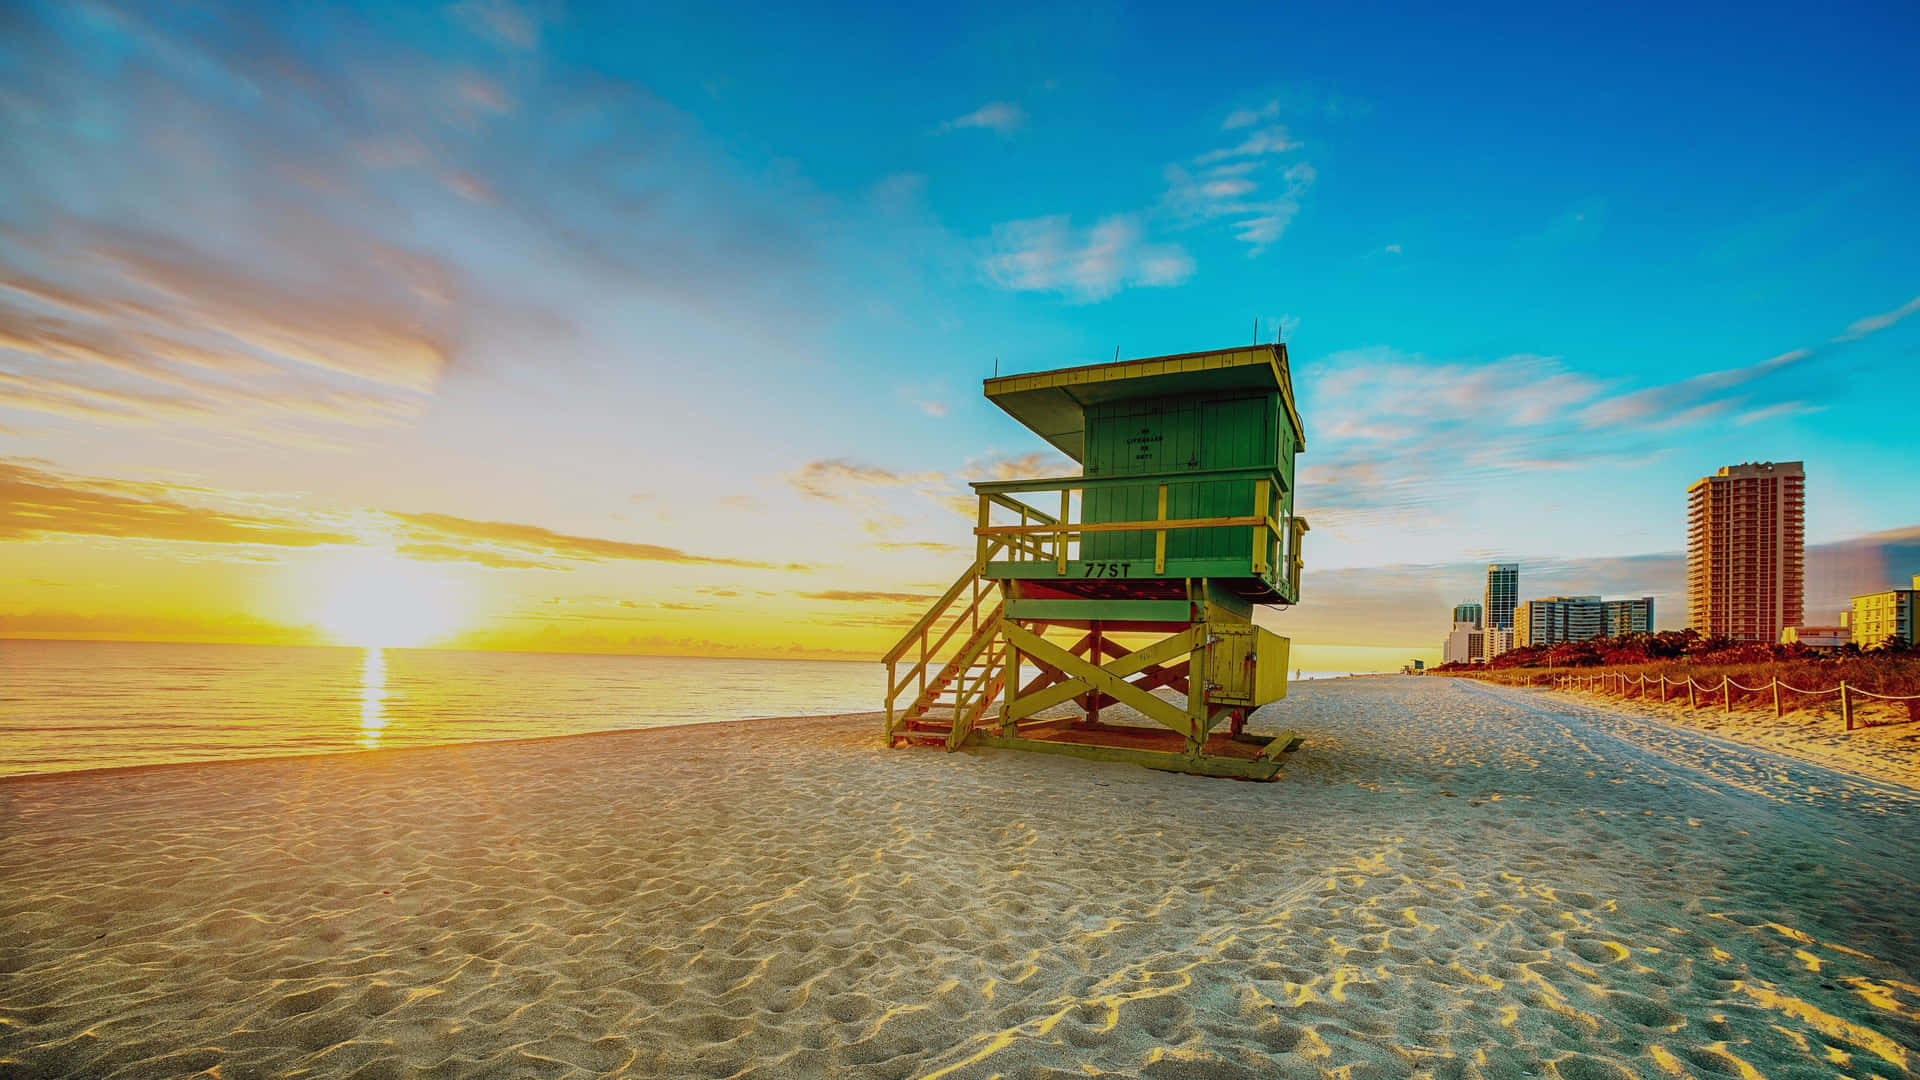 Miami Beach Neon Lifeguard Tower With Sunset Picture